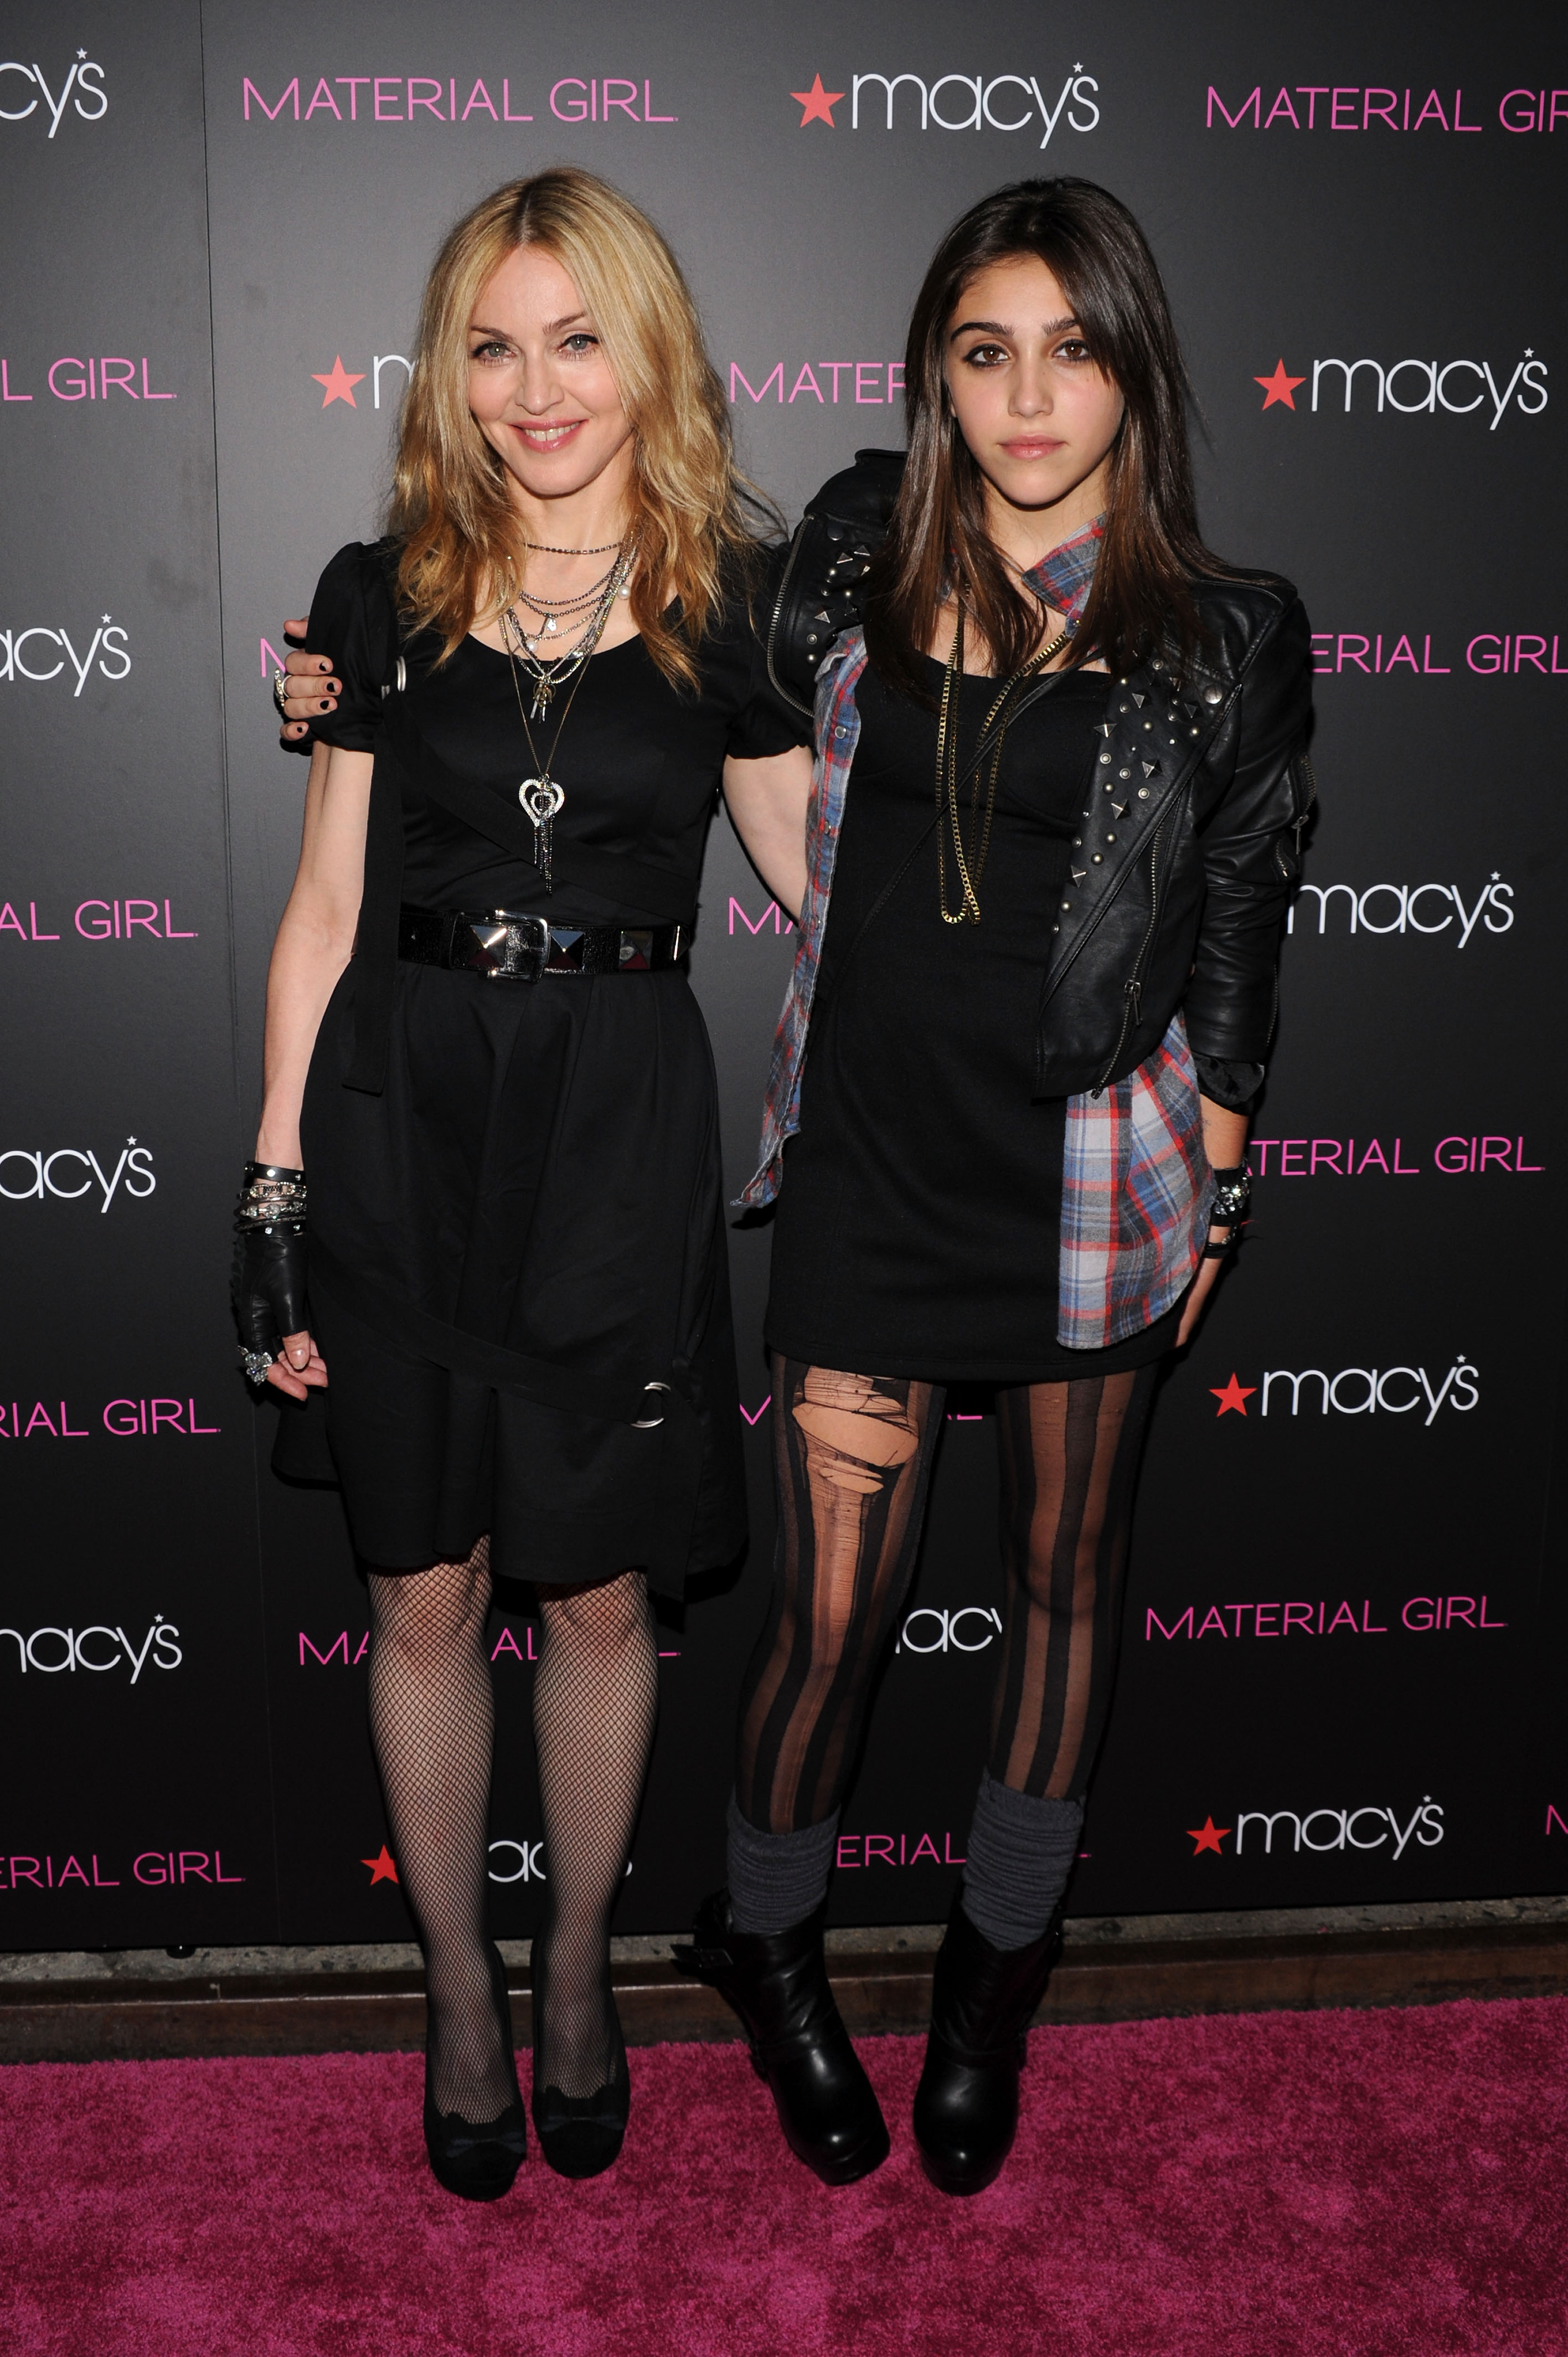 Madonna and Lourdes "Lola" Leon on September 22, 2010 in New York City | Source: Getty Images